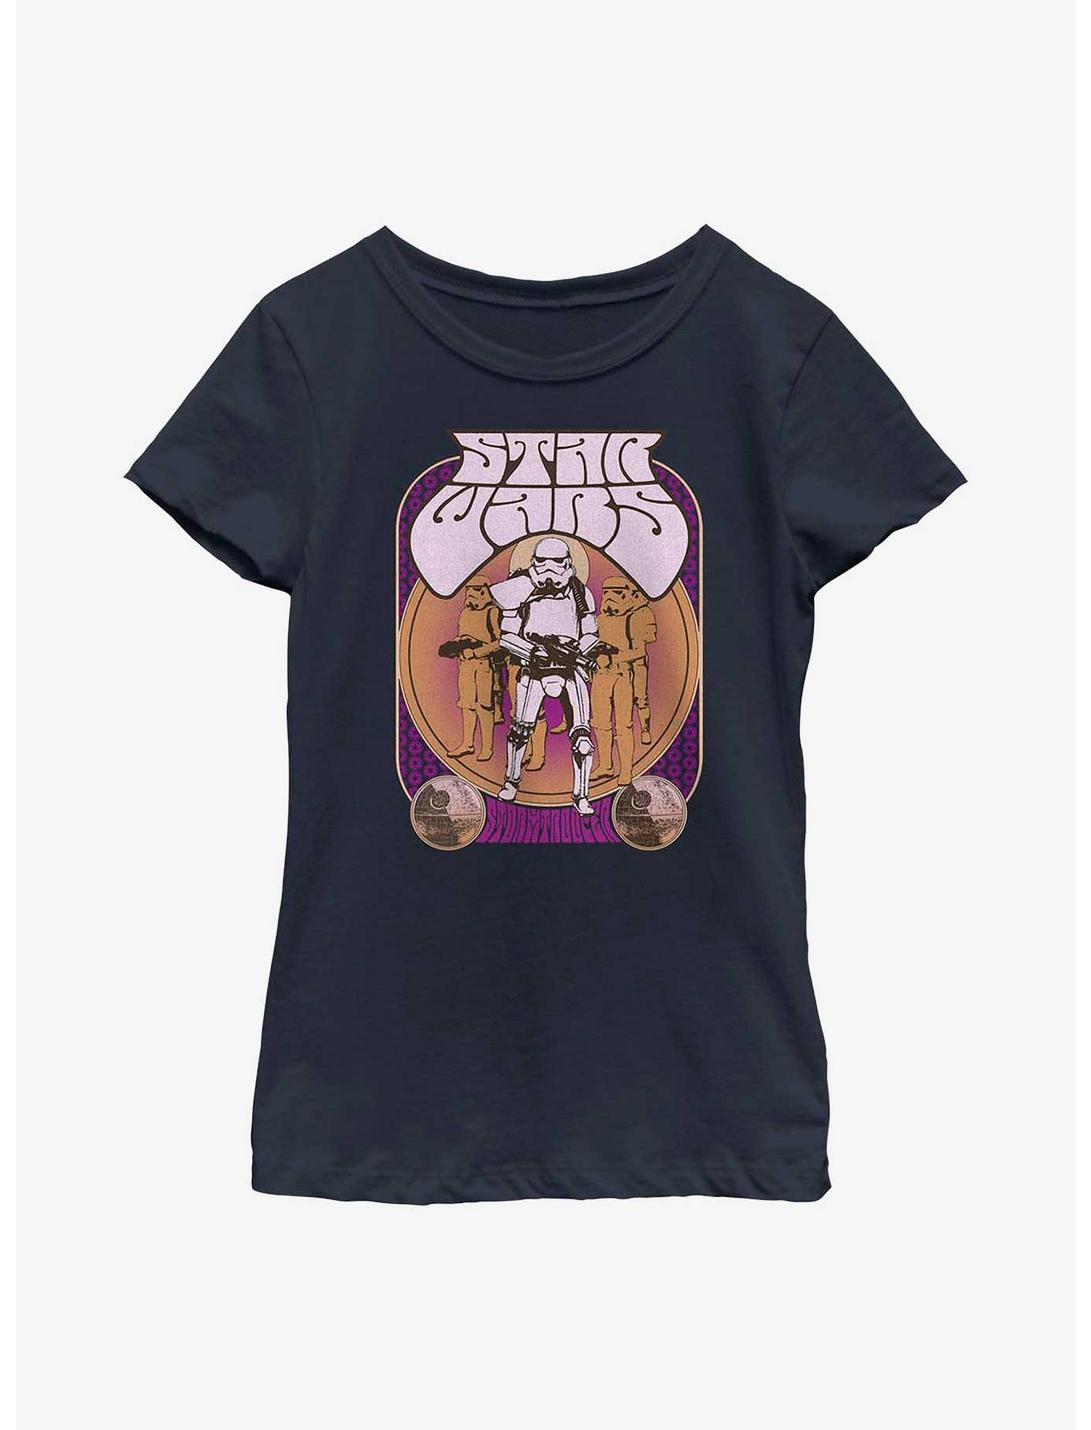 Star Wars Stormtrooper Groovy Youth Girls T-Shirt, NAVY, hi-res